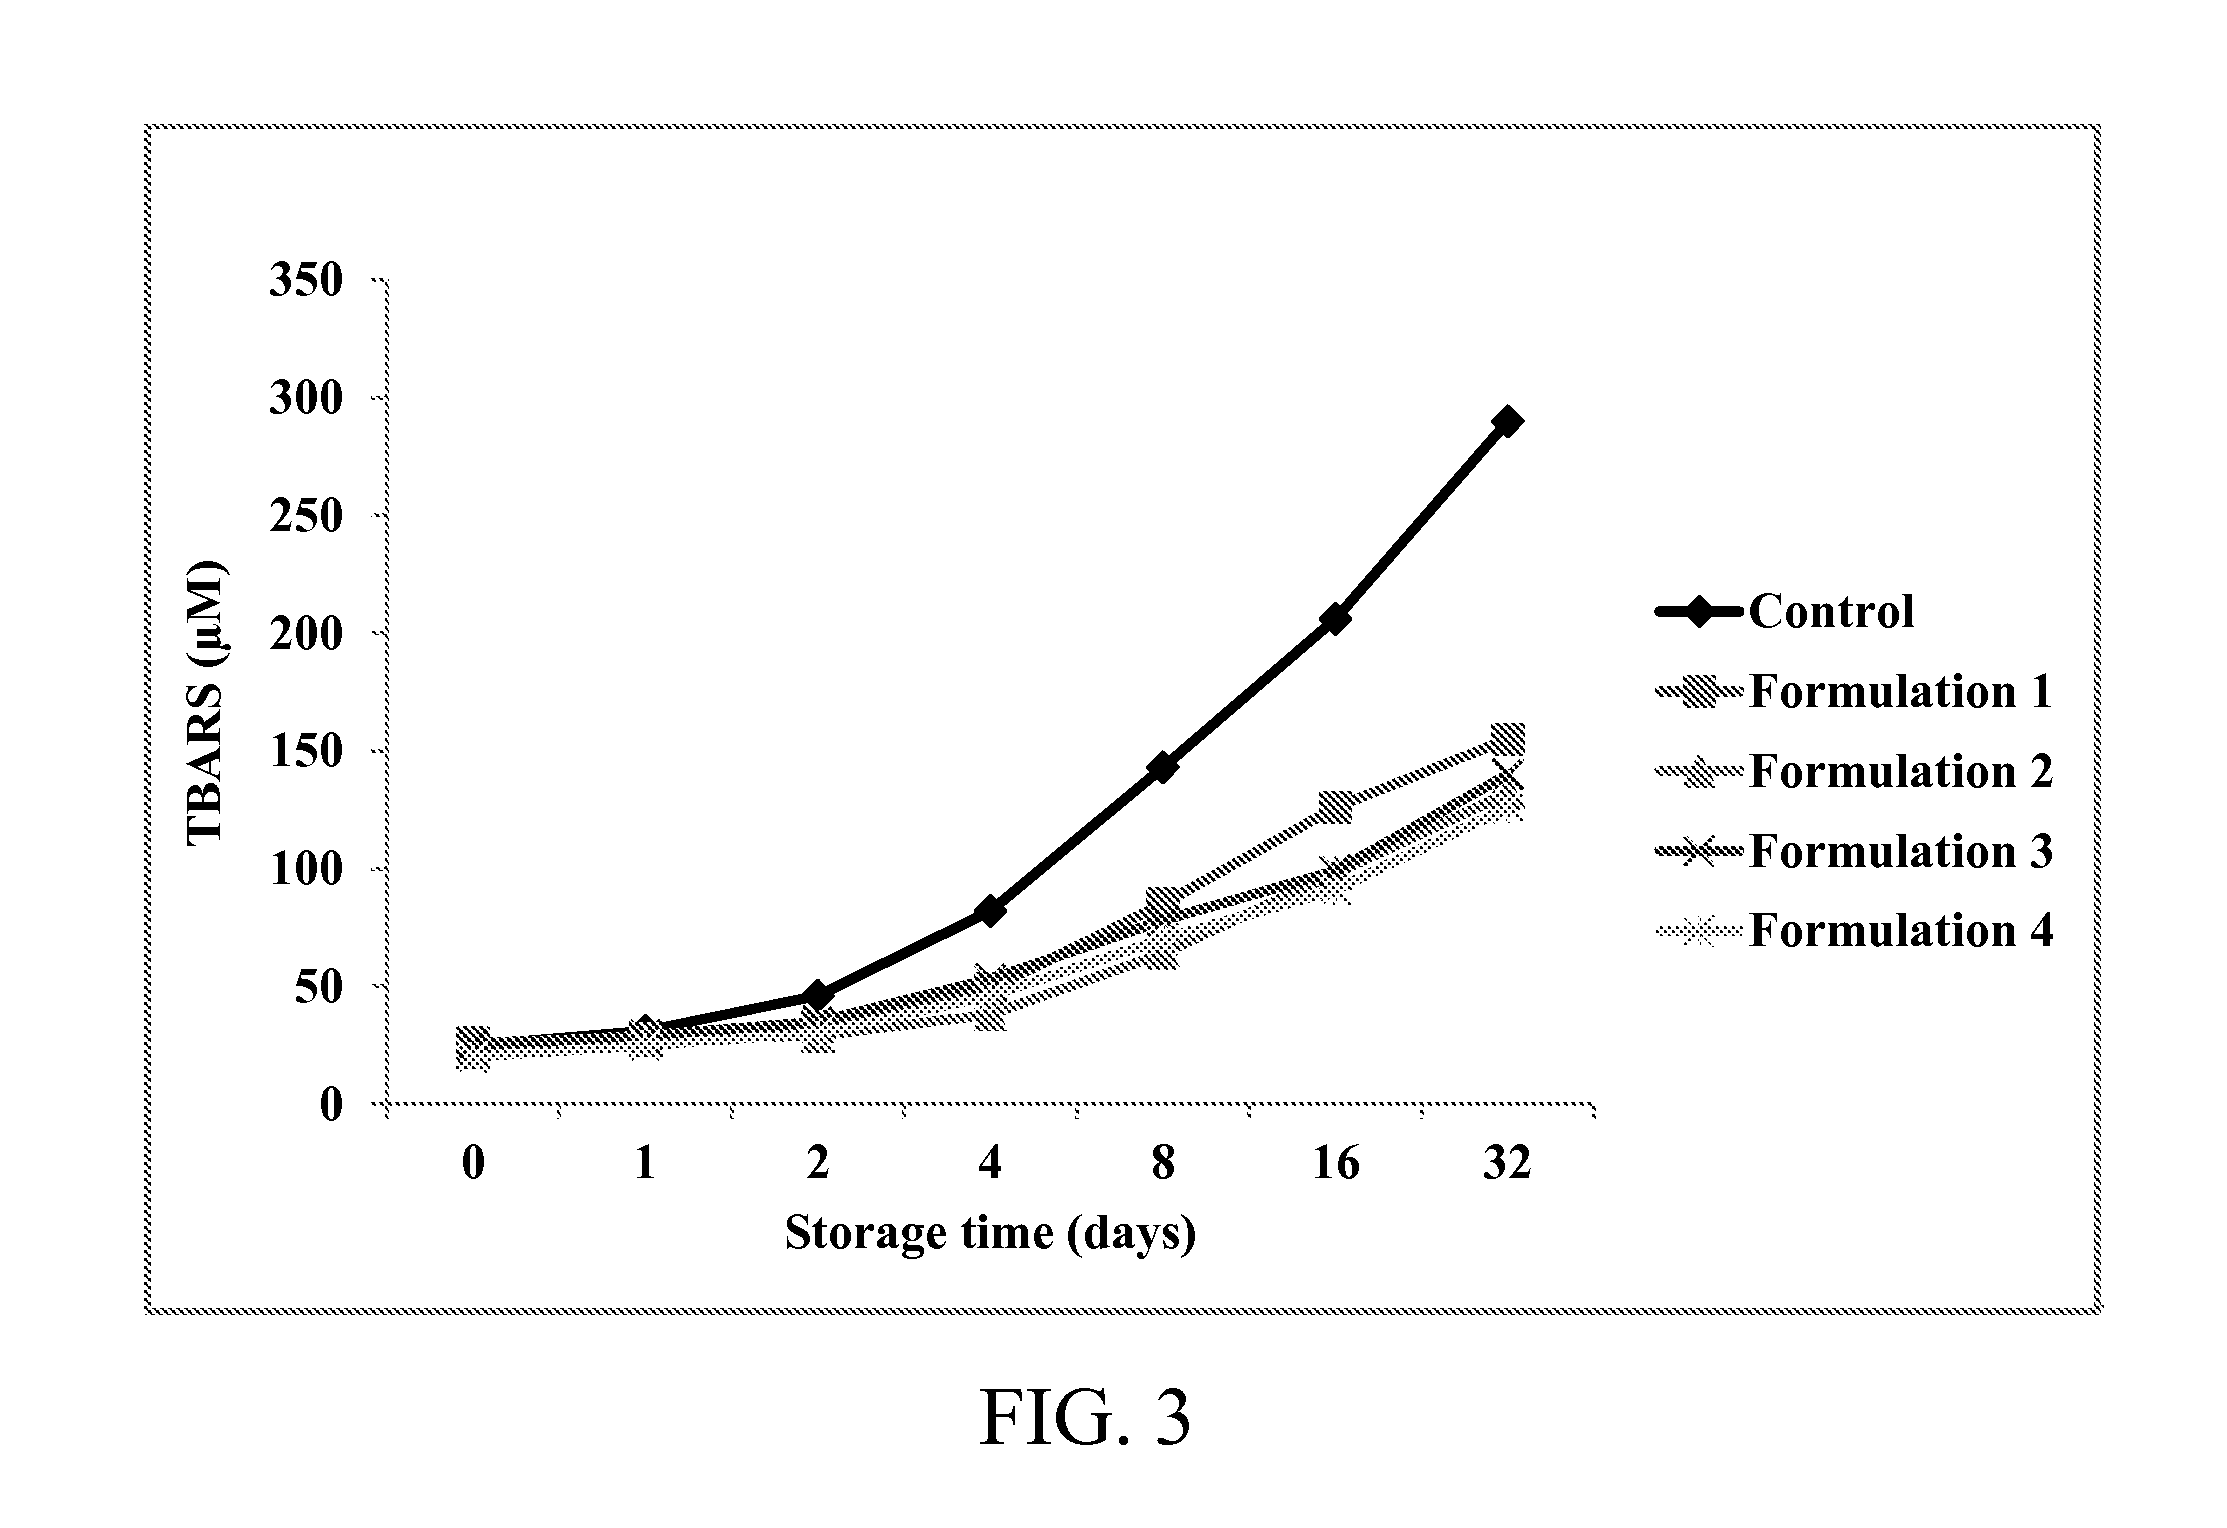 Compositions for targeted Anti-aging therapy